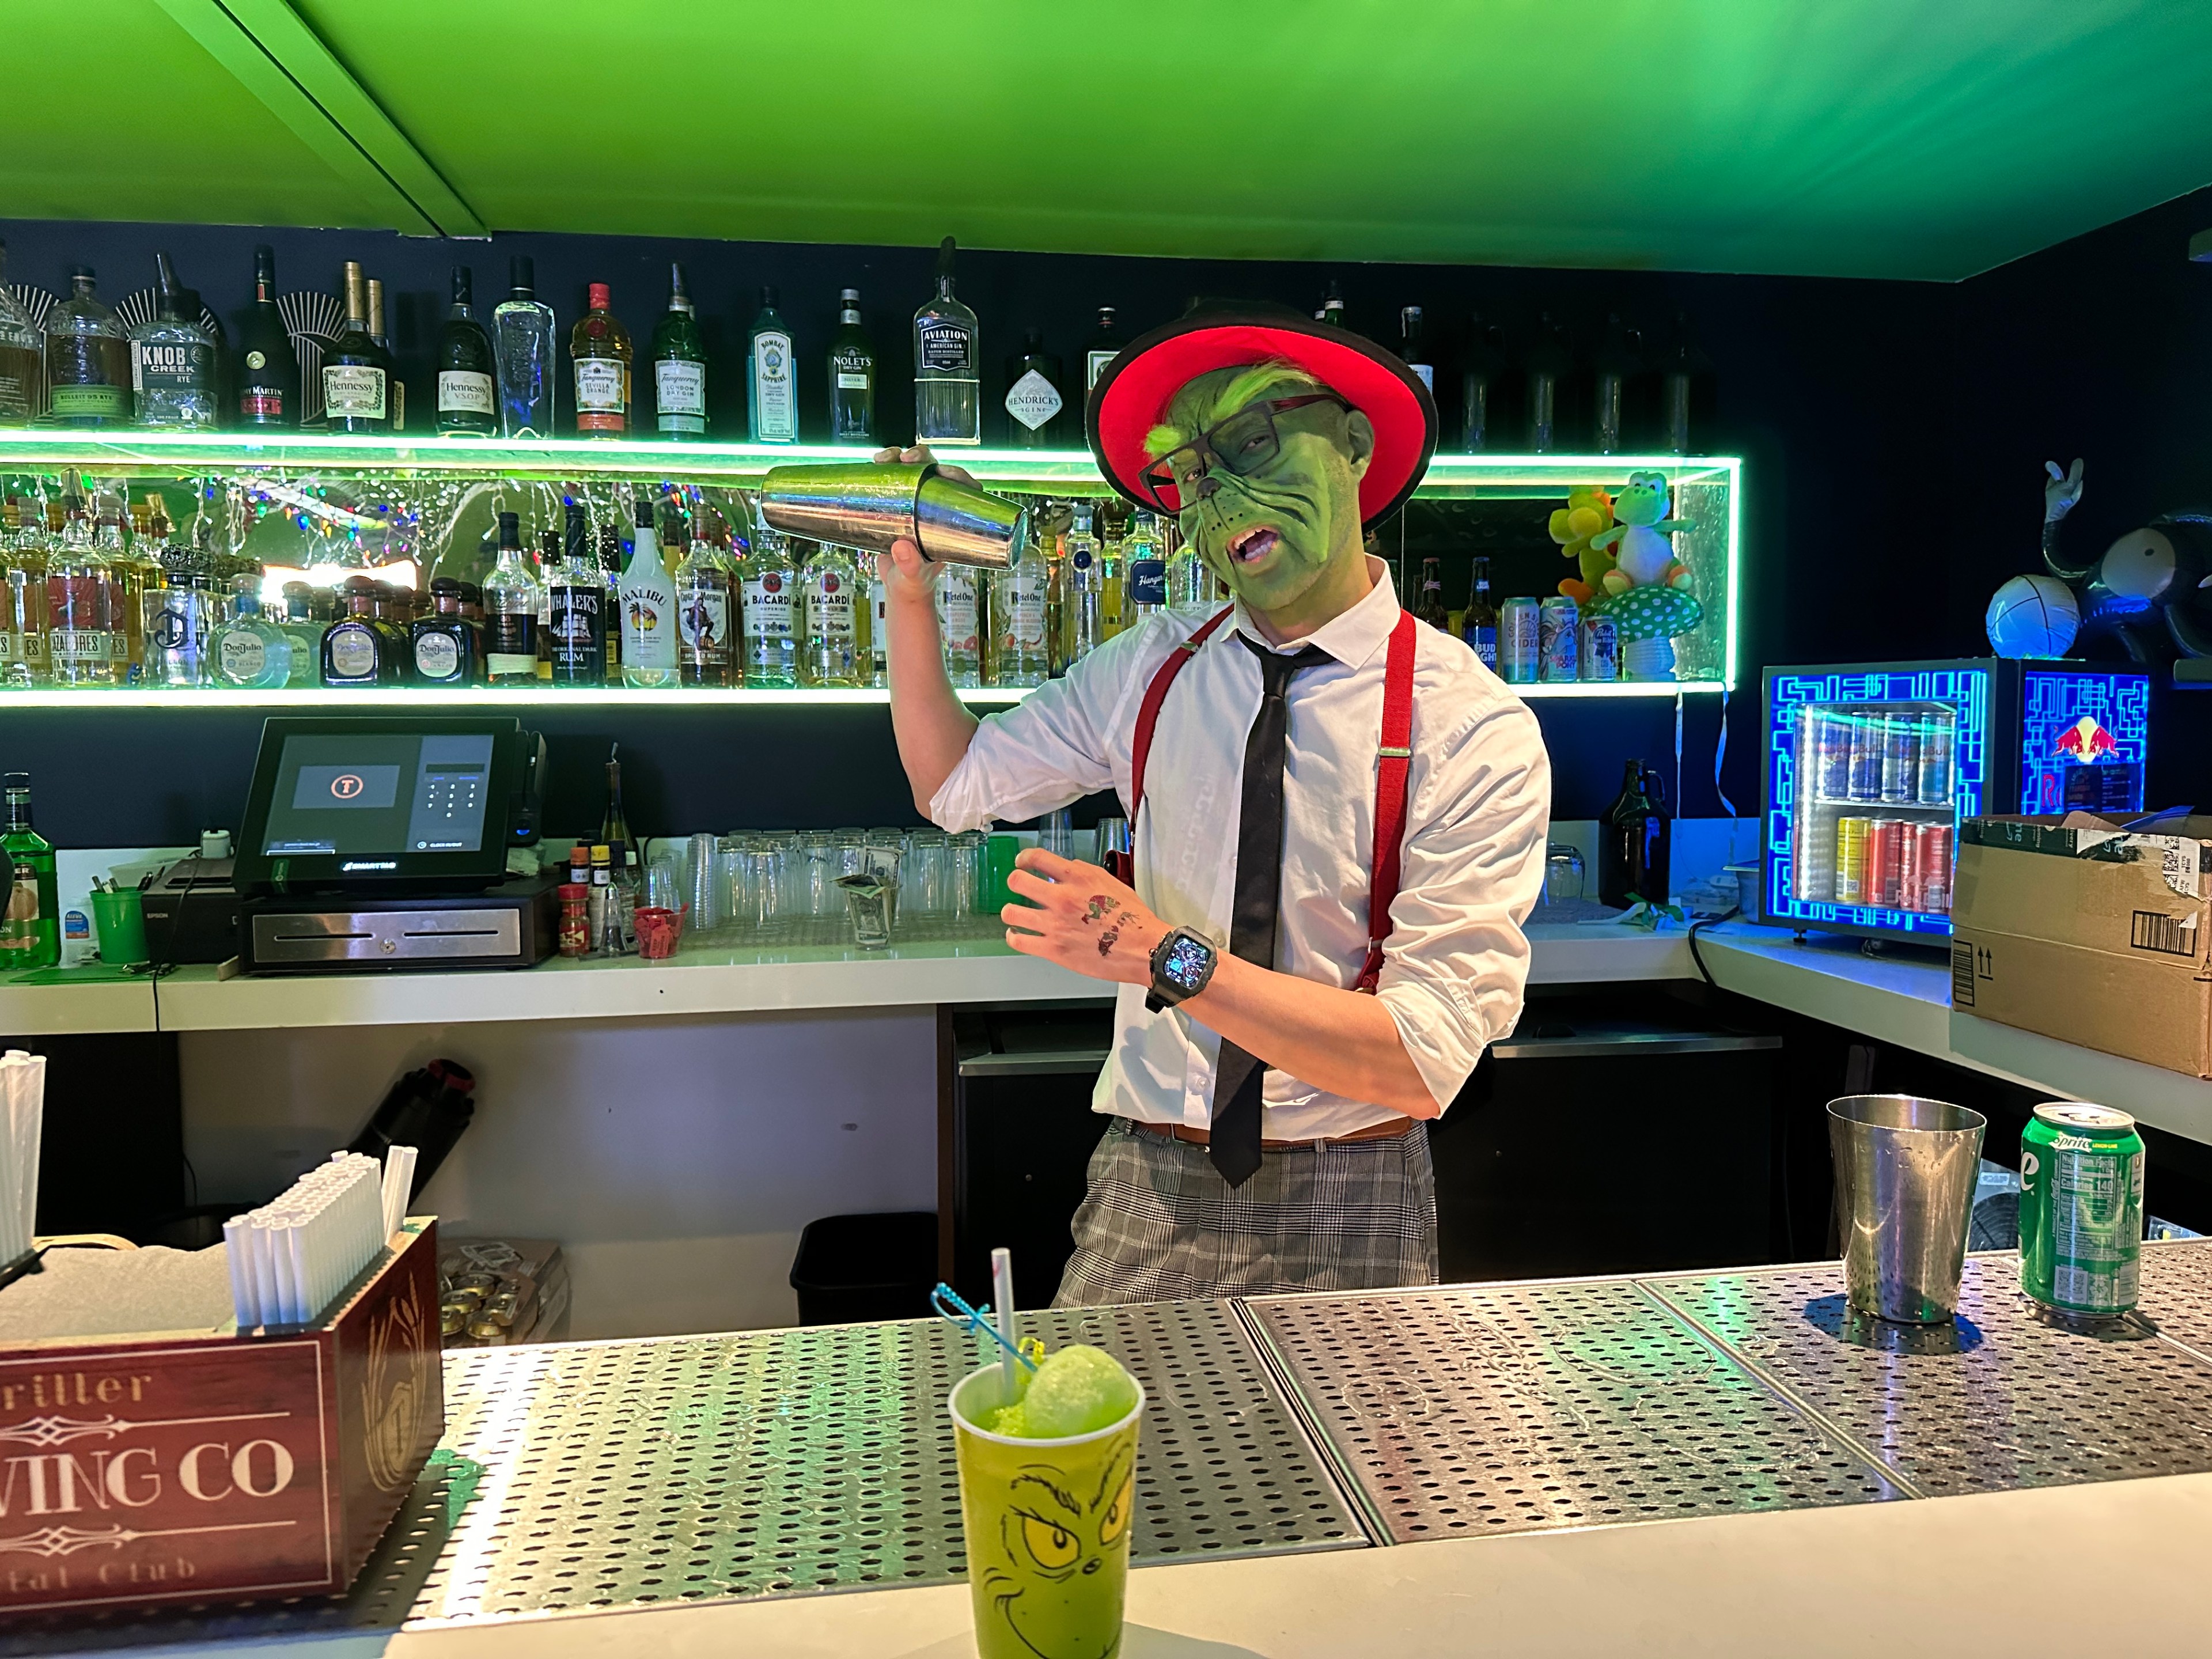 A bartender dressed as Dr. Seuss's the Grinch shakes up a Grinch-themed green cocktail behind a bar.  